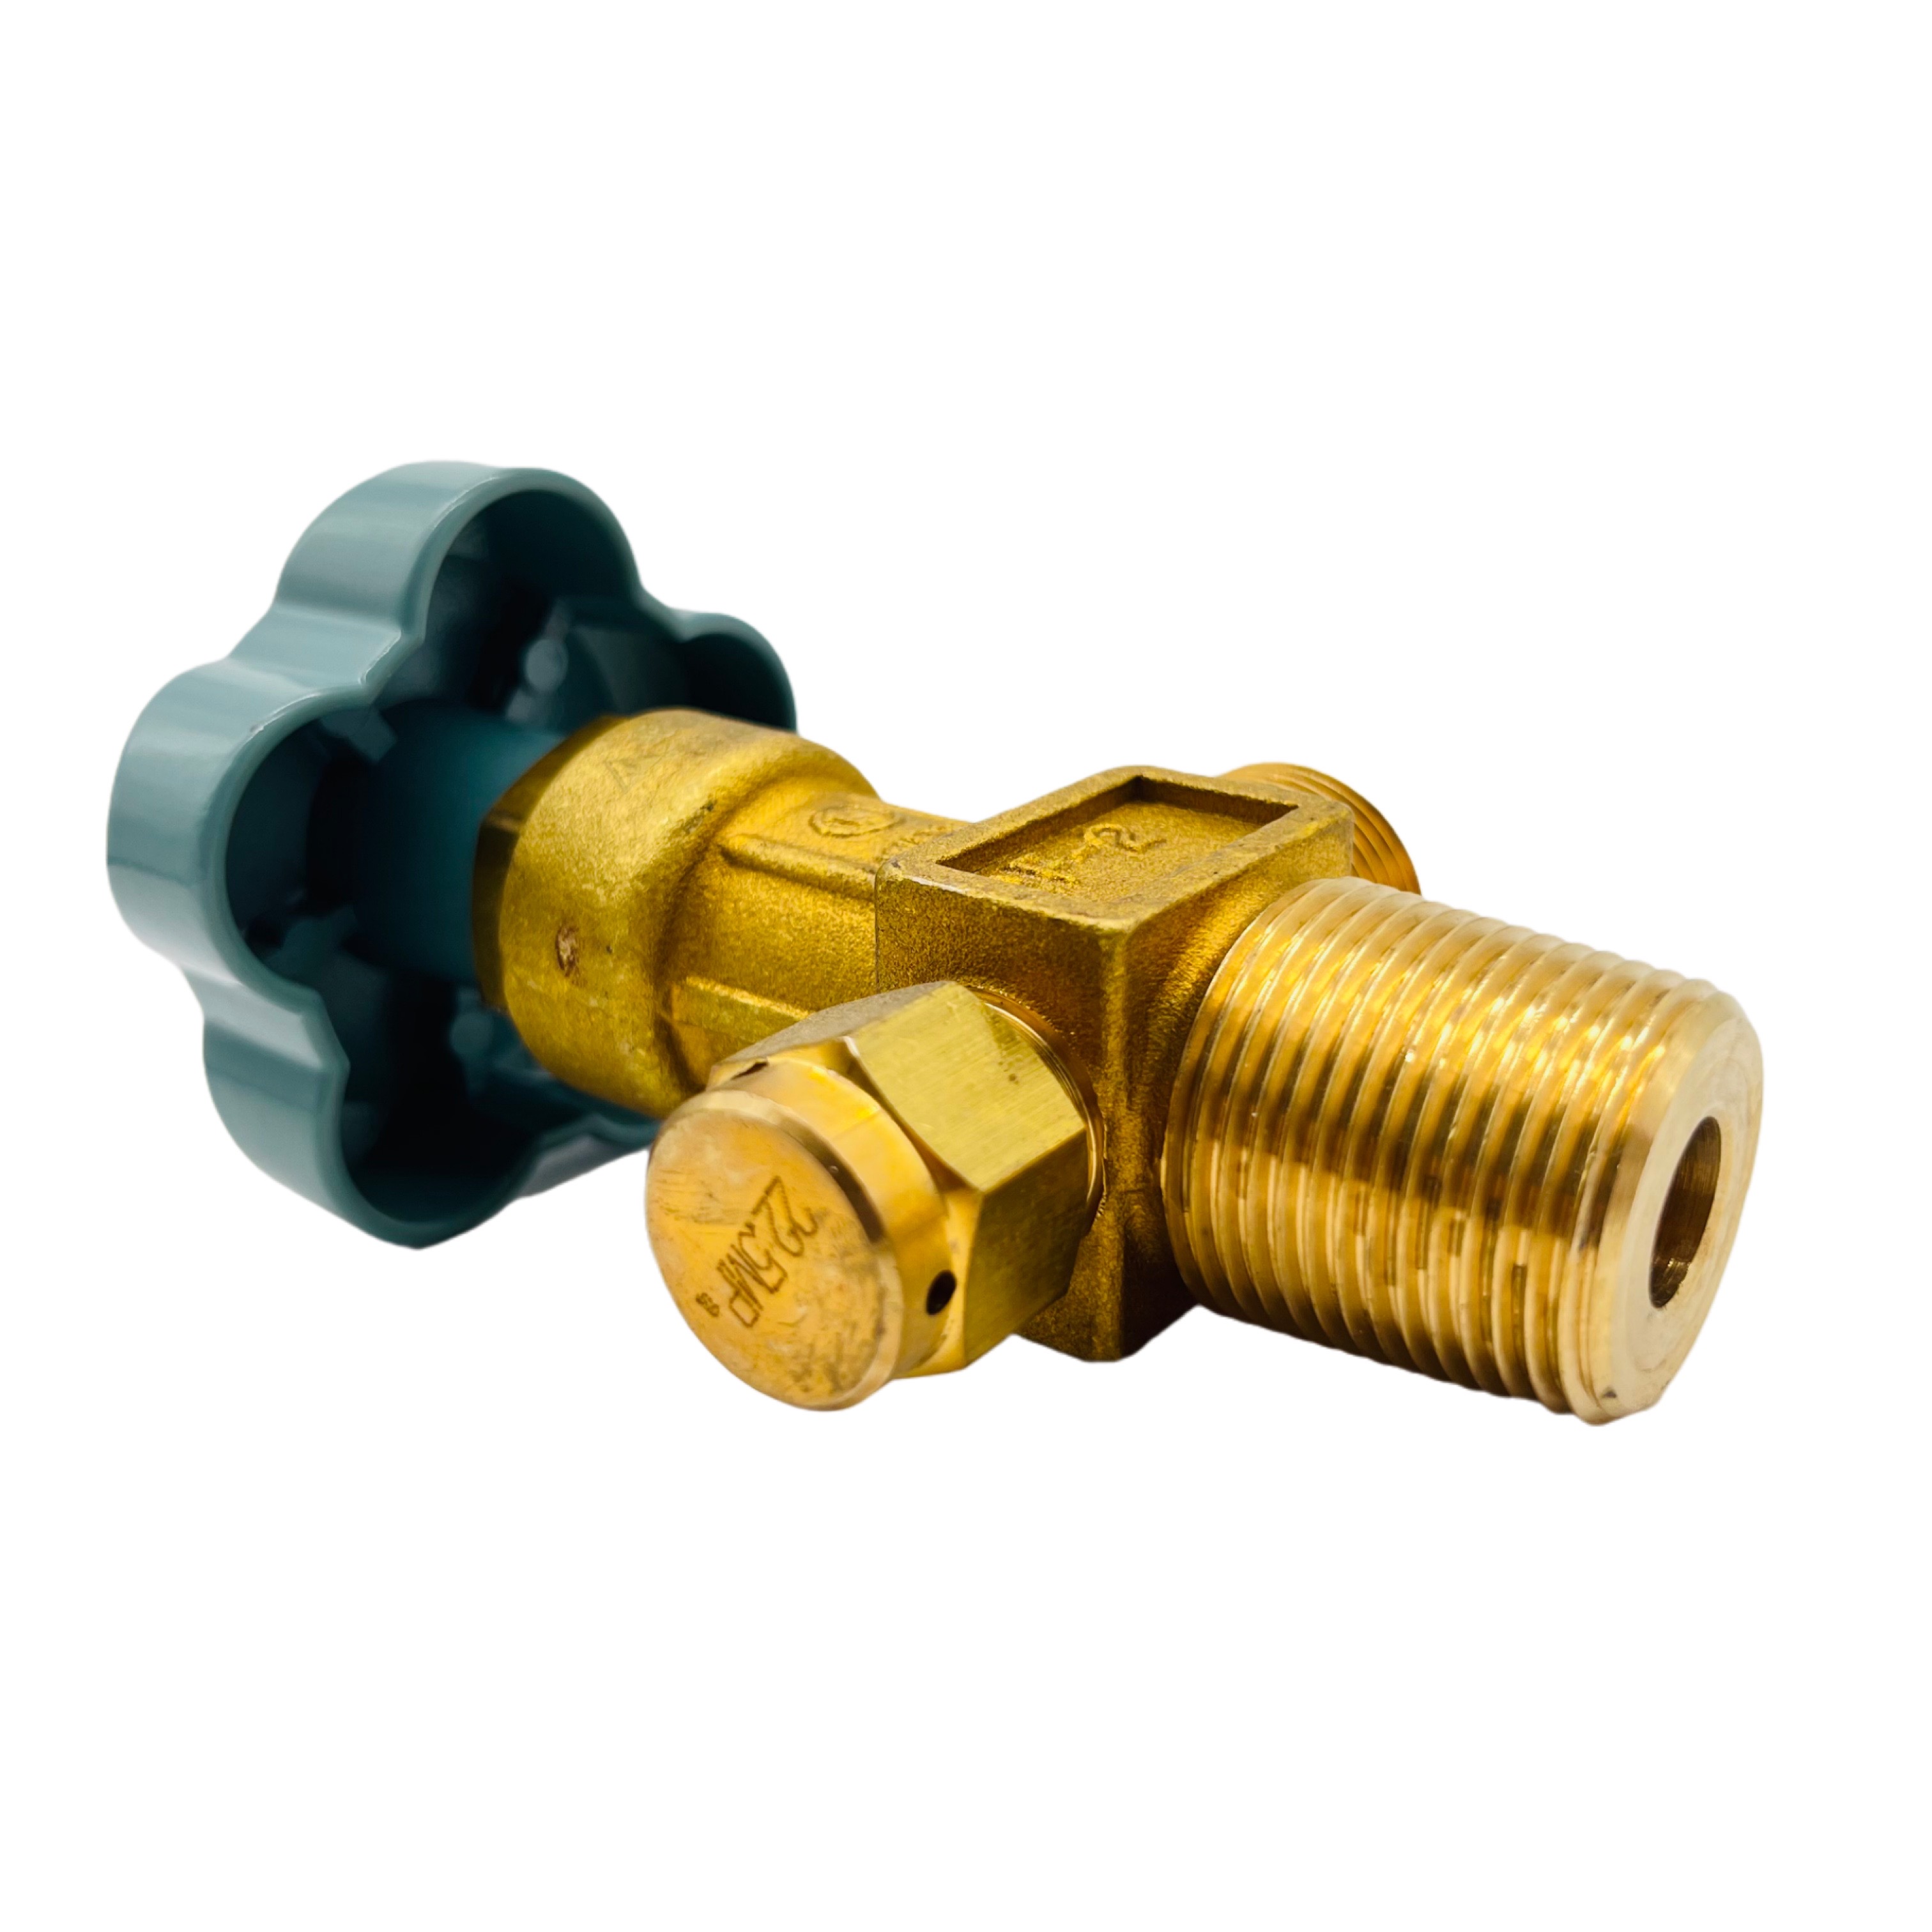 PF5-1 Shaft Coupling Type Brass Acetylene Cylinder Valve from